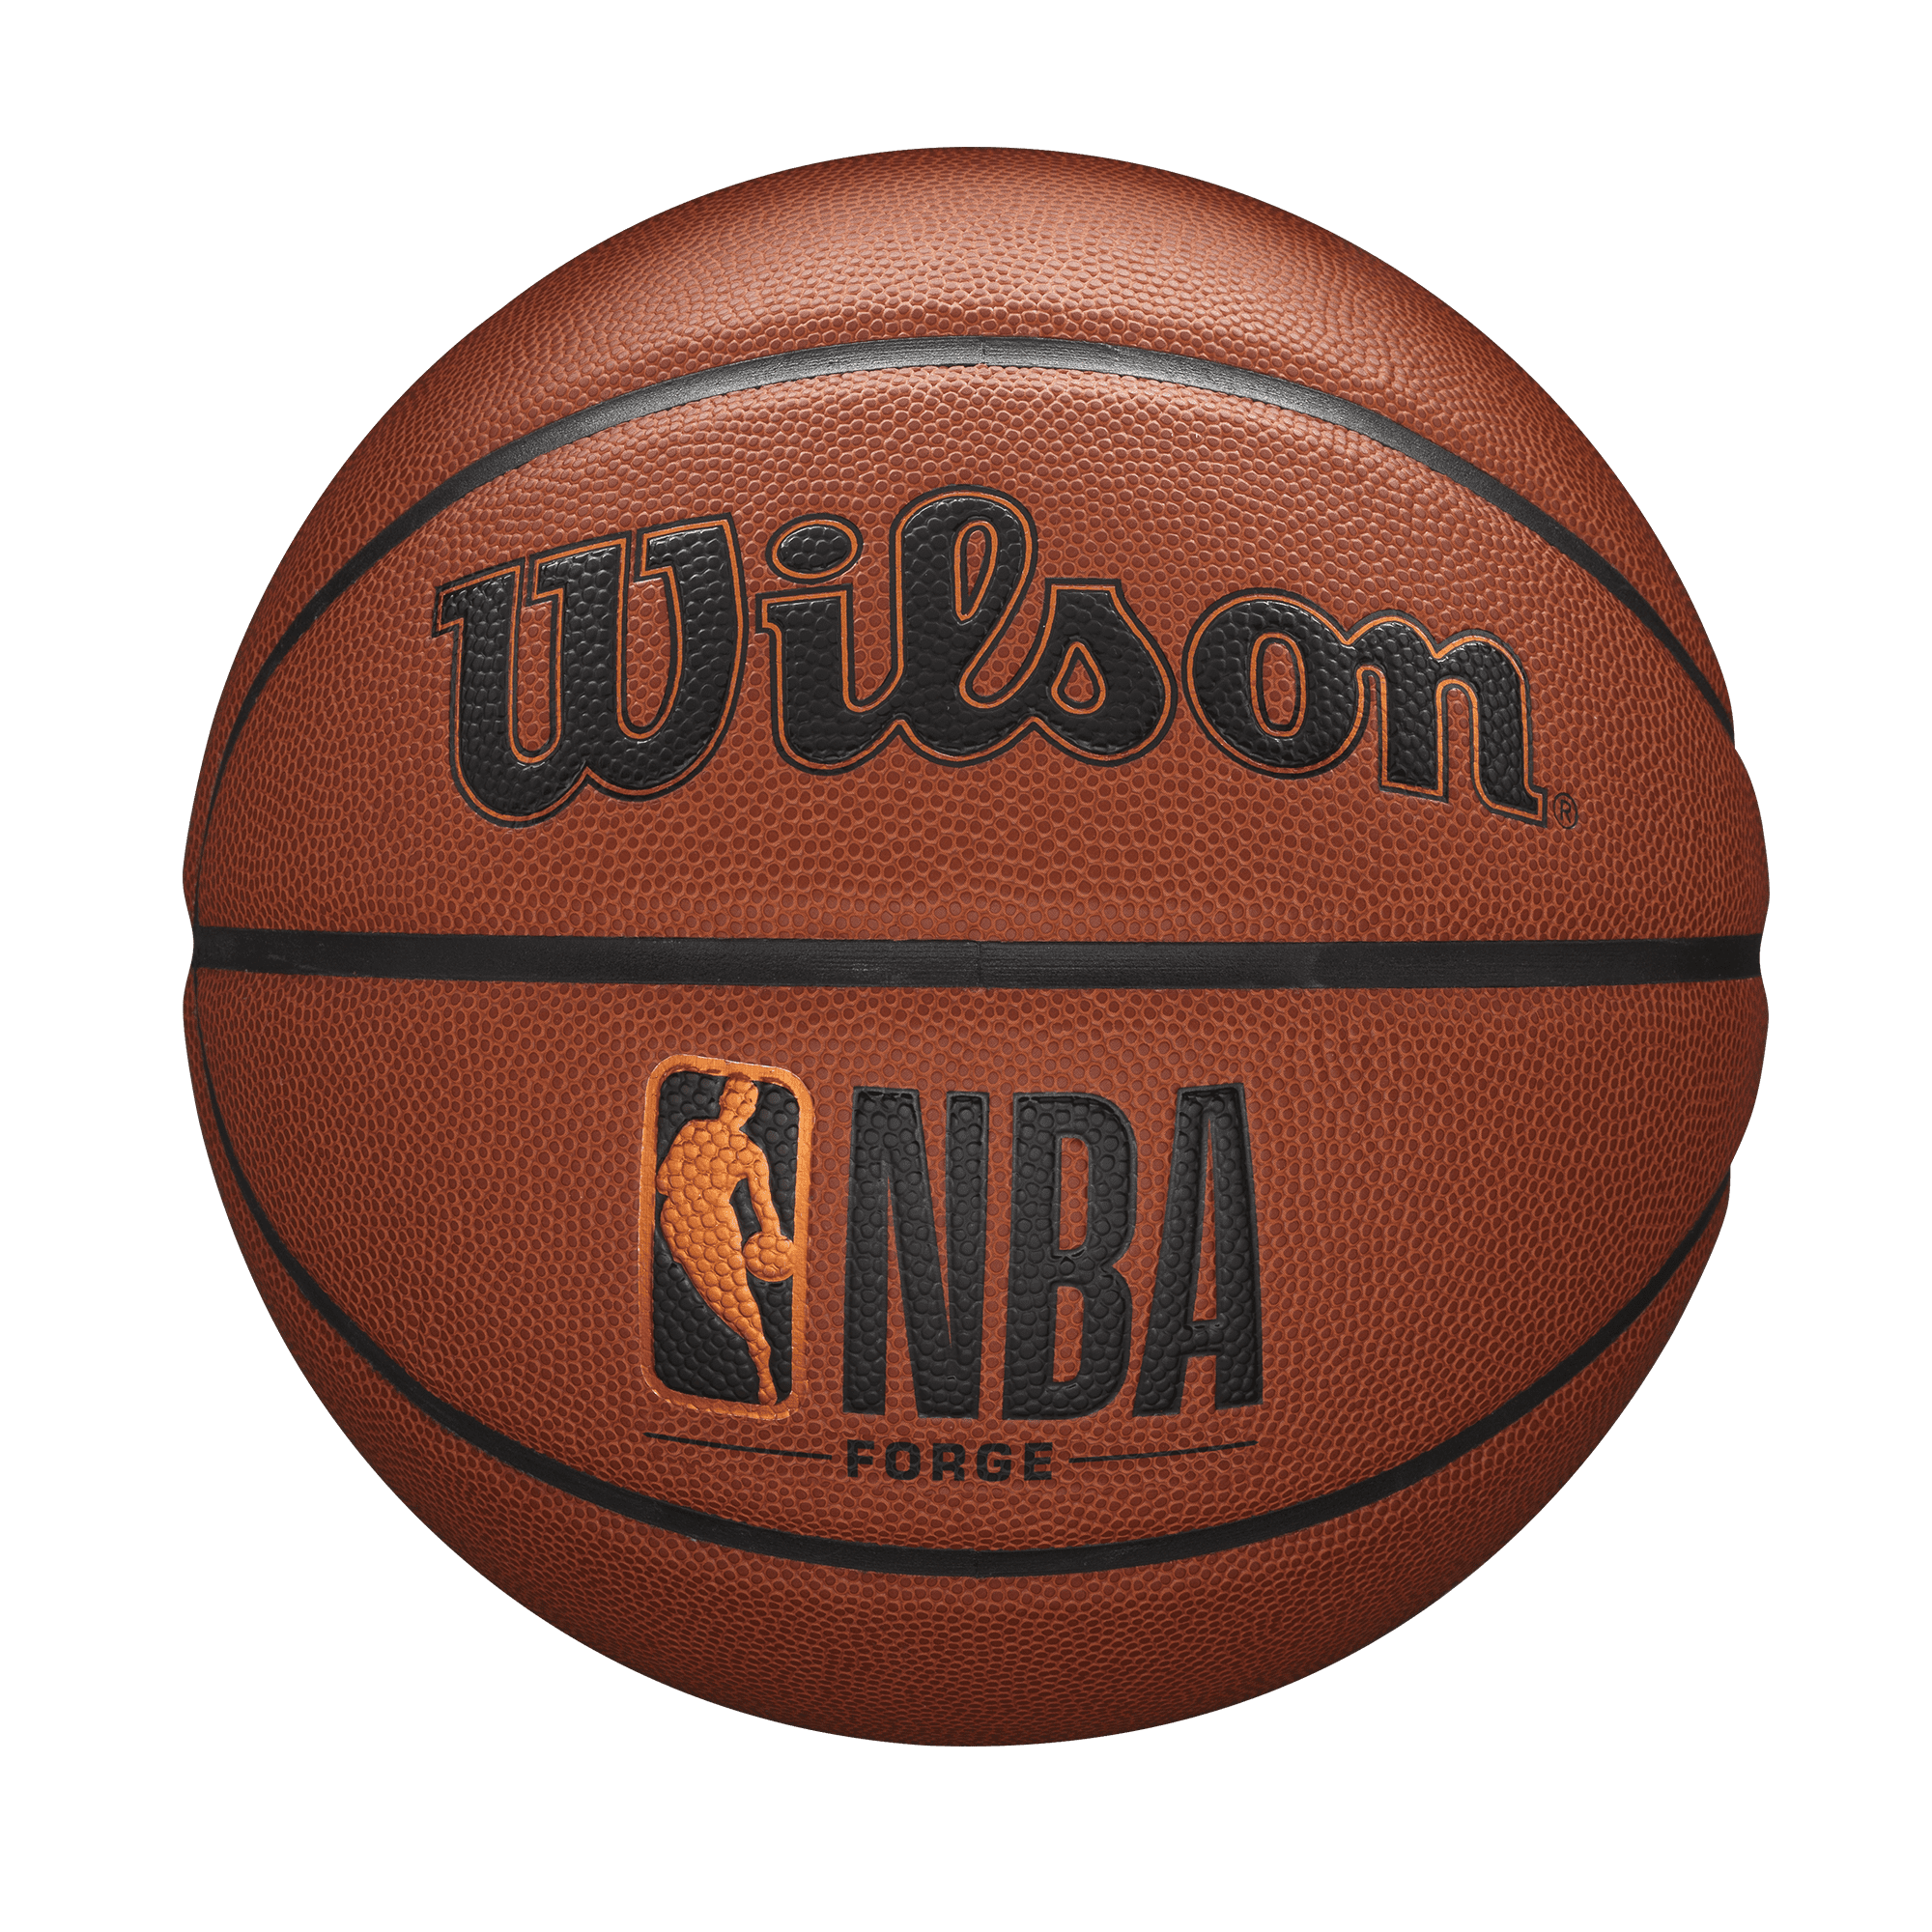 Size 22,25.5,27.5,28.5,29.5 Size 3 Toddlers, Size 4 Kids, Size 5 Youth, Size 6 WNBA, Size 7 Adult & Pro Reboil Super Grip Basketball – Indoor & Outdoor 